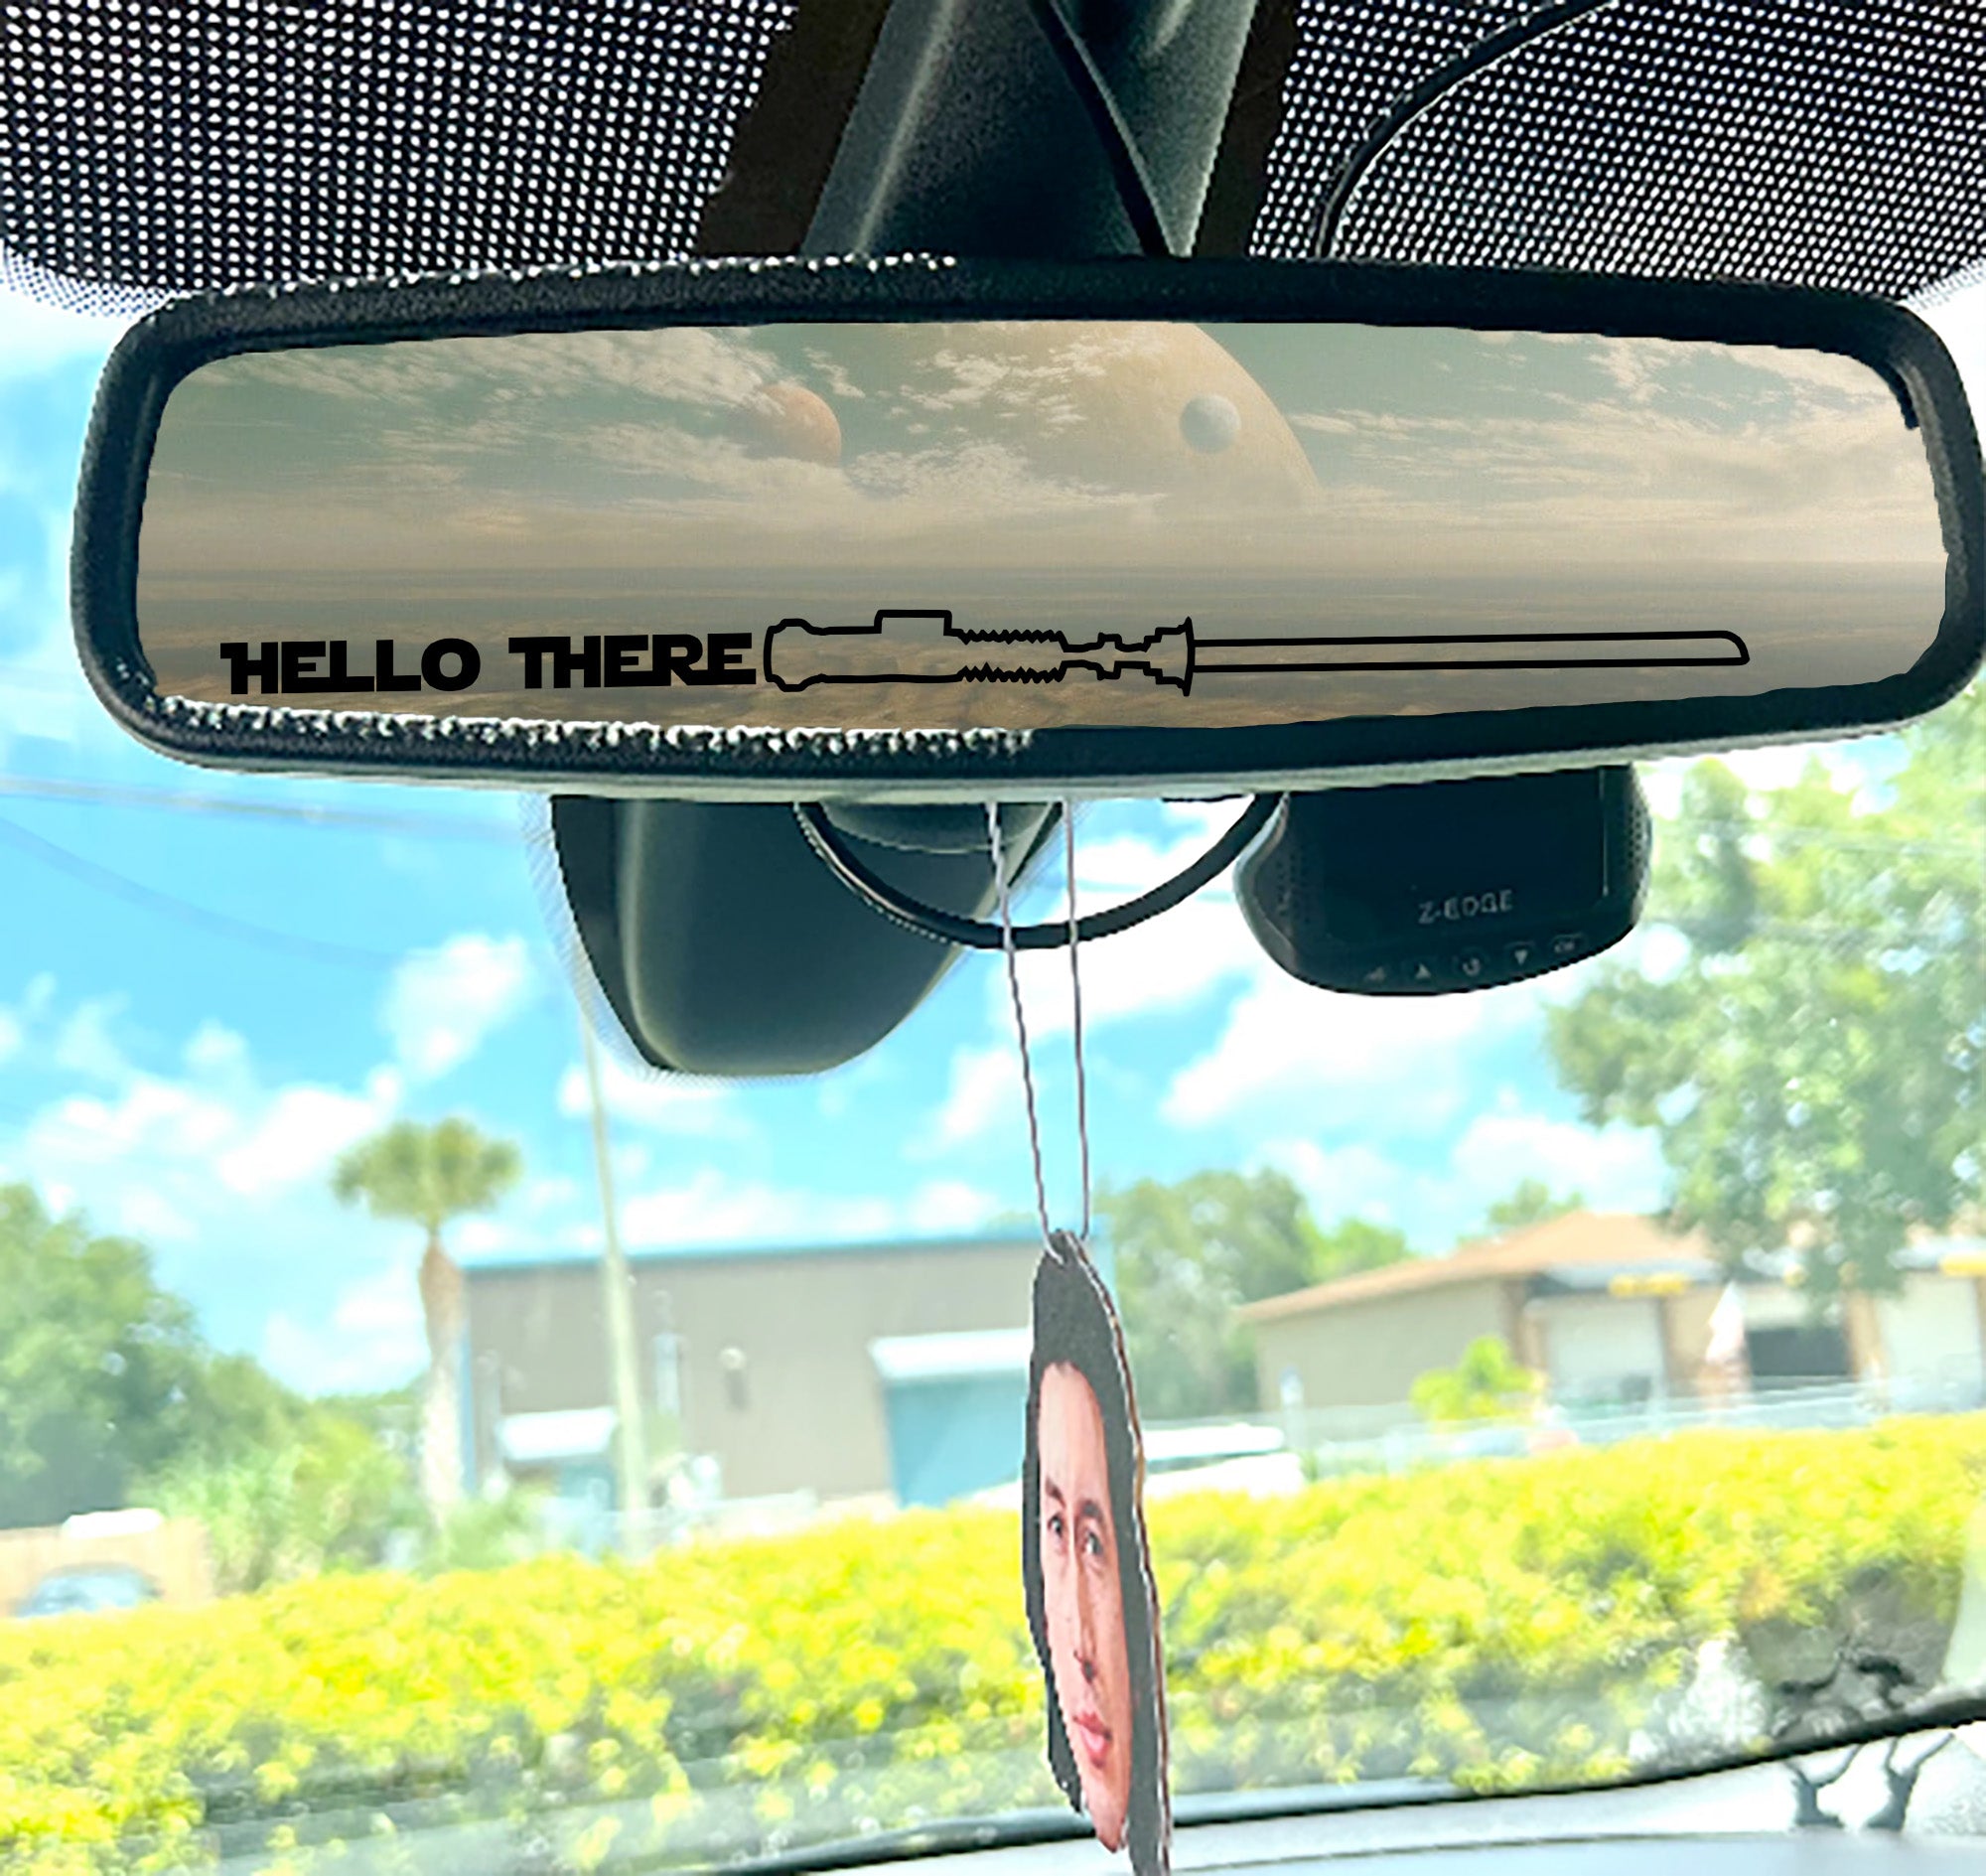 Hello There Lightsaber Car Mirror Decal